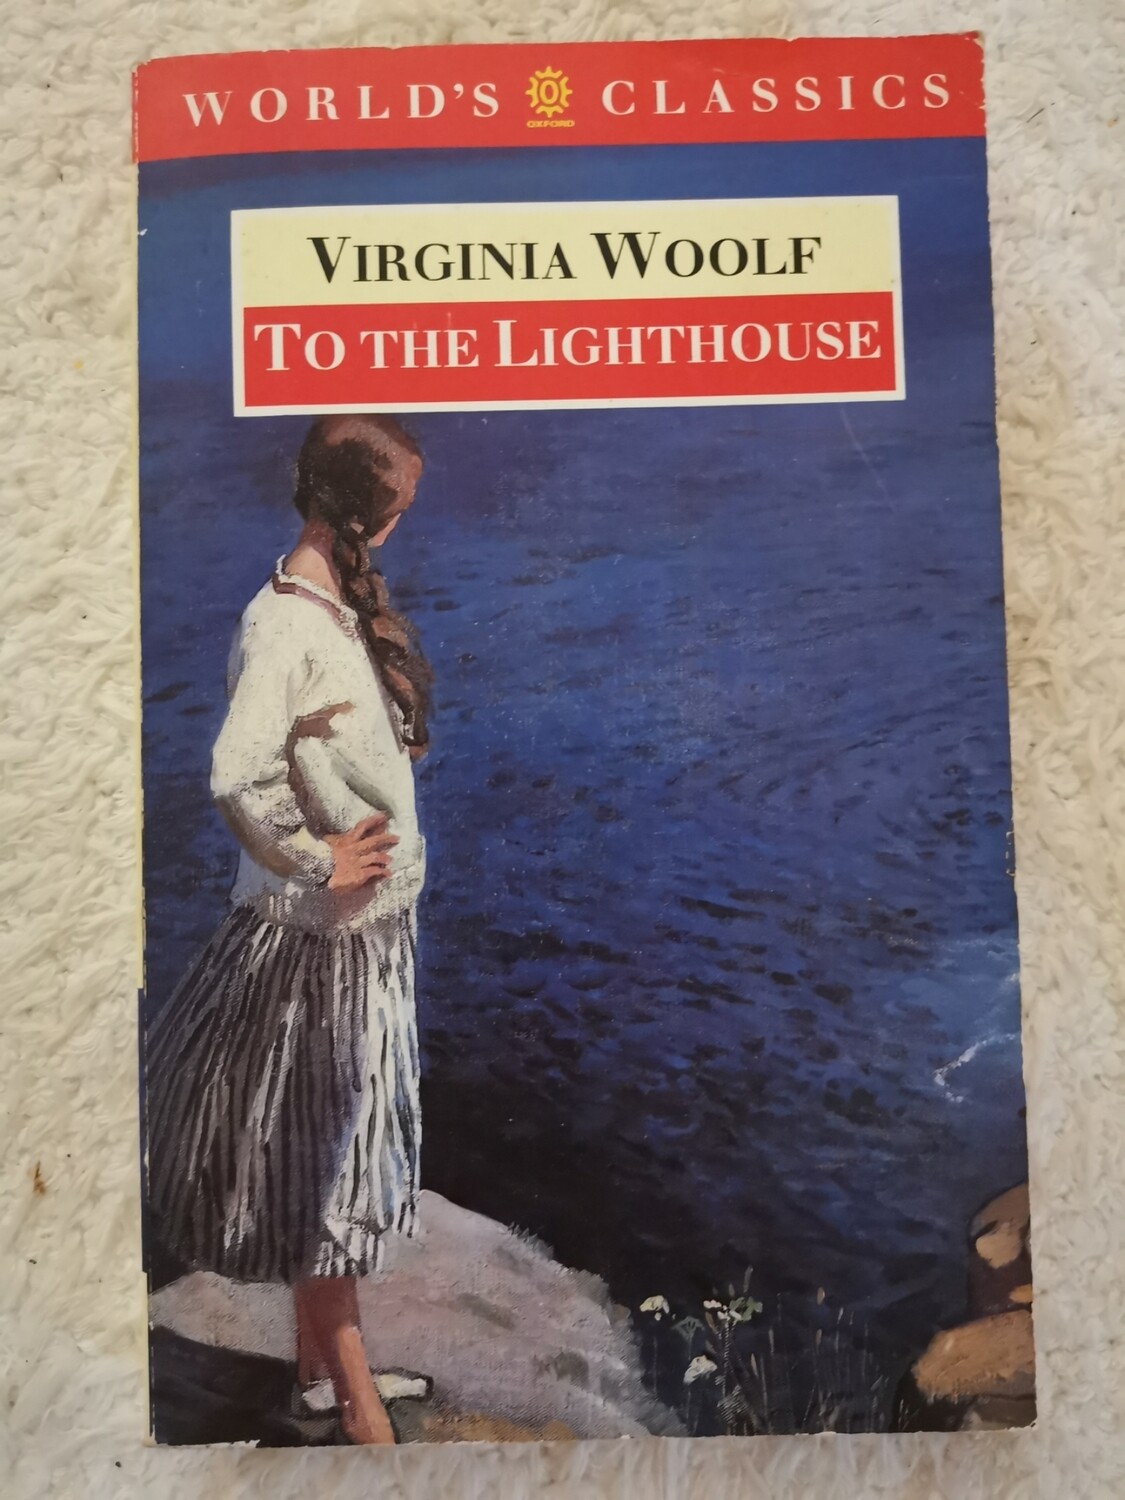 To the lighthouse, Virginia Woolf